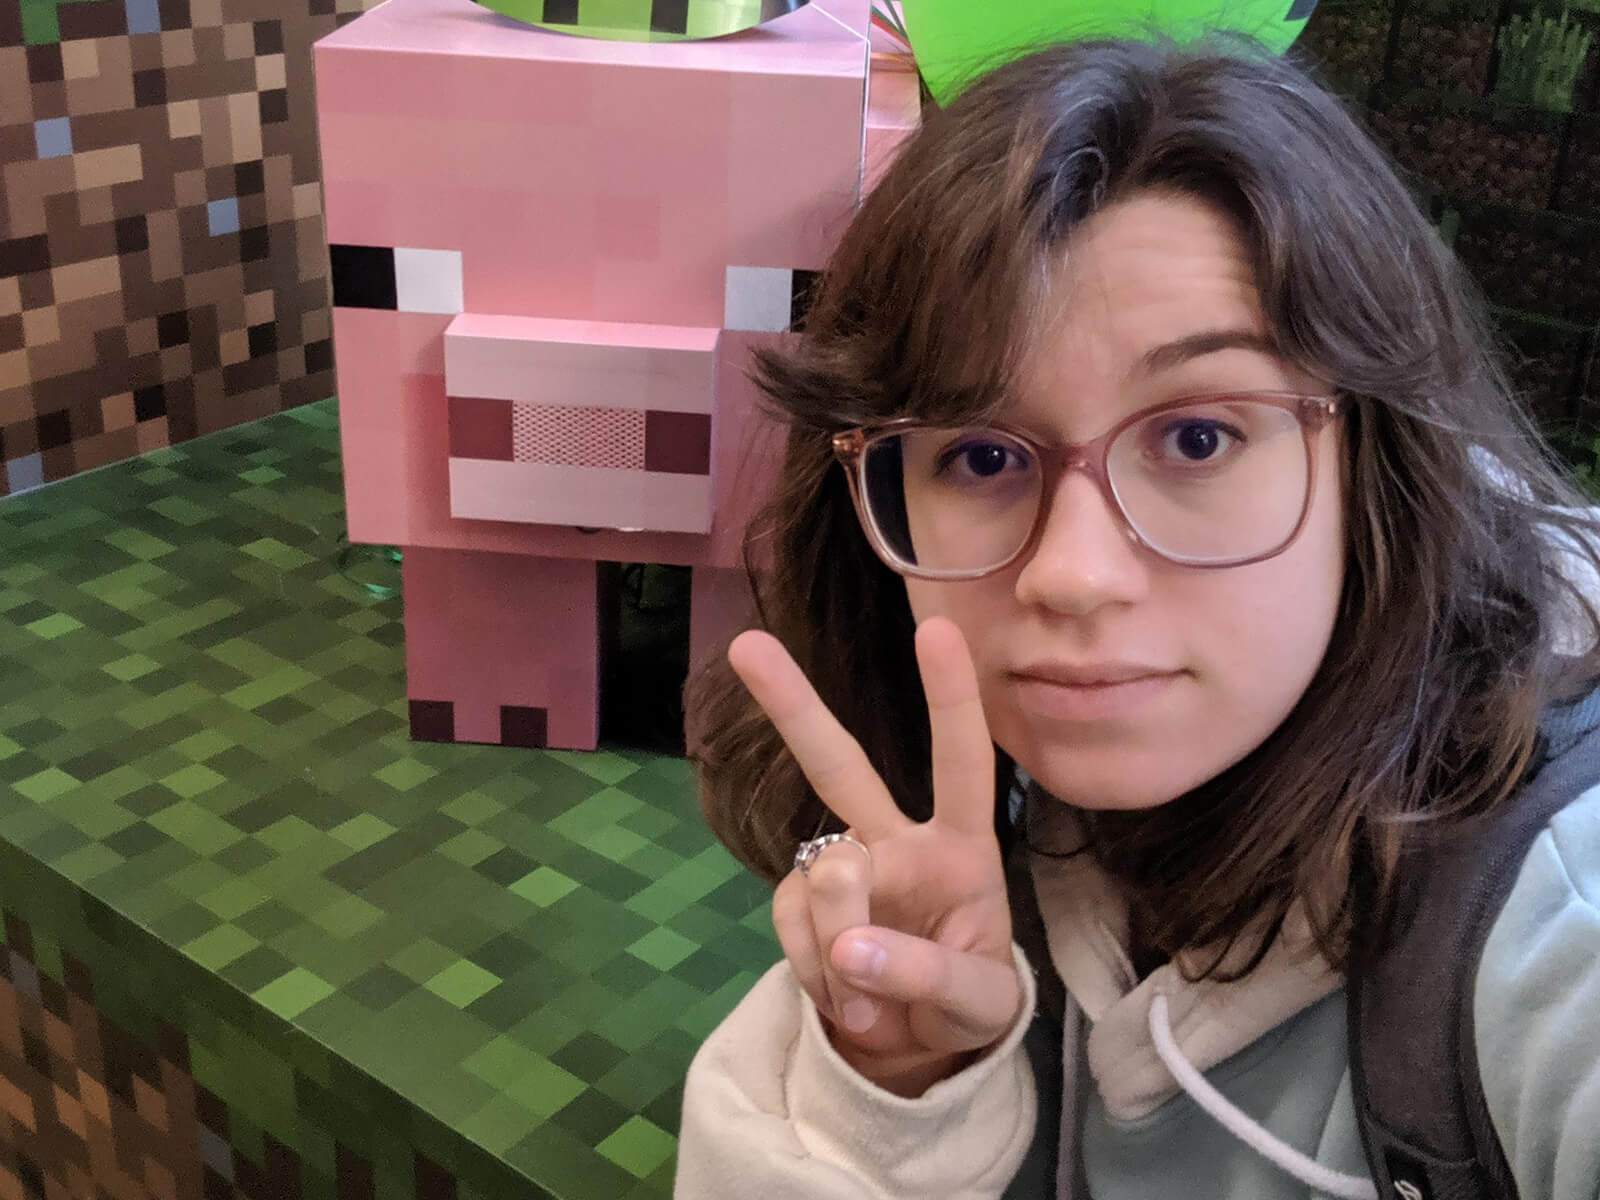 DigiPen graduate and Mojang artist Kelly Greene flashes a peace sign next to Minecraft Earth’s Muddy Pig